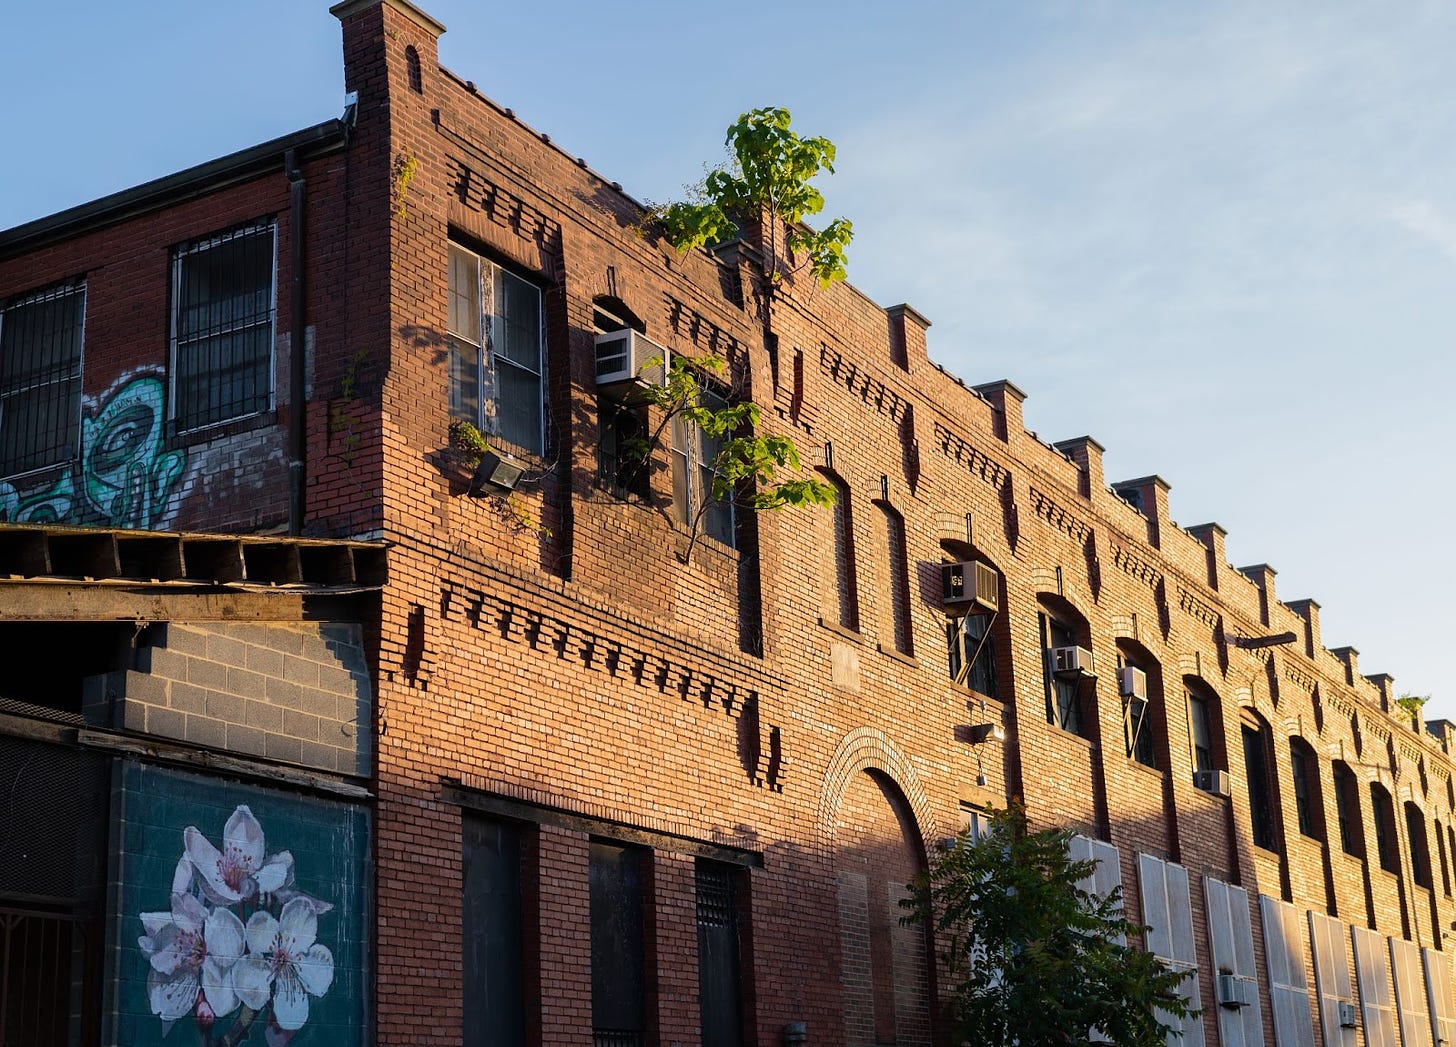 Old brick building, golden sun, trees growing out of the building